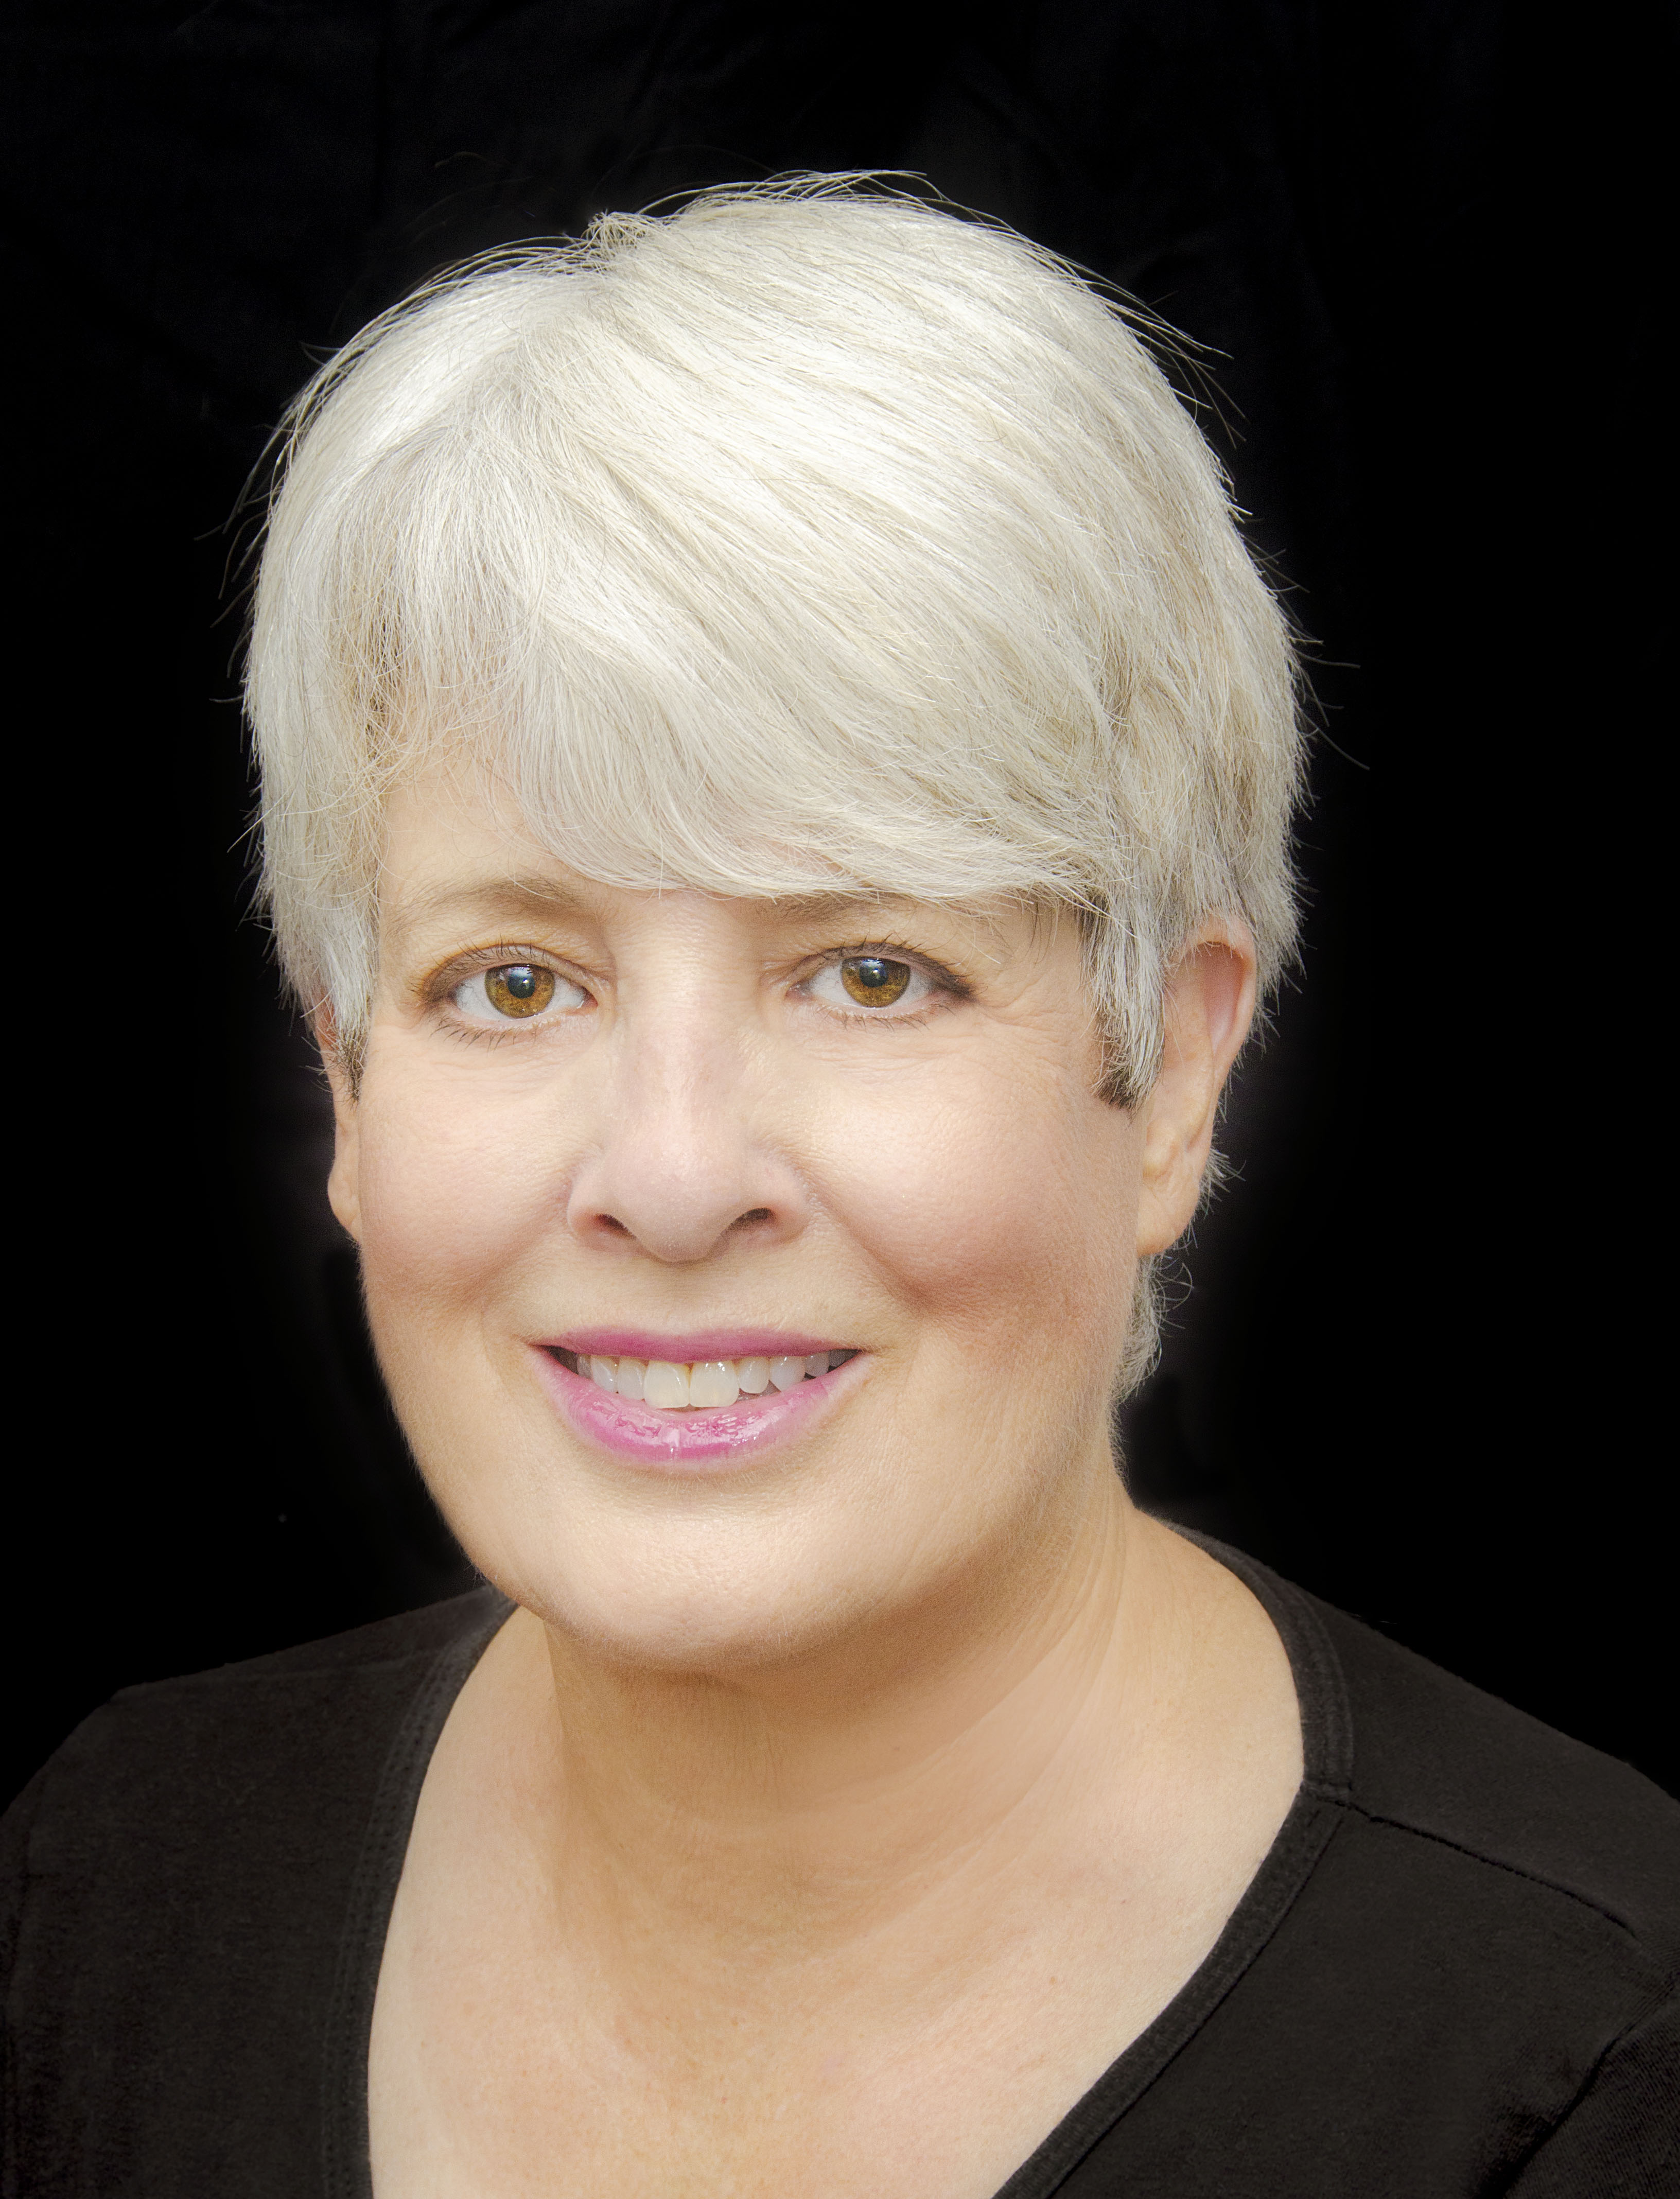 Woman with gray hair and smiling